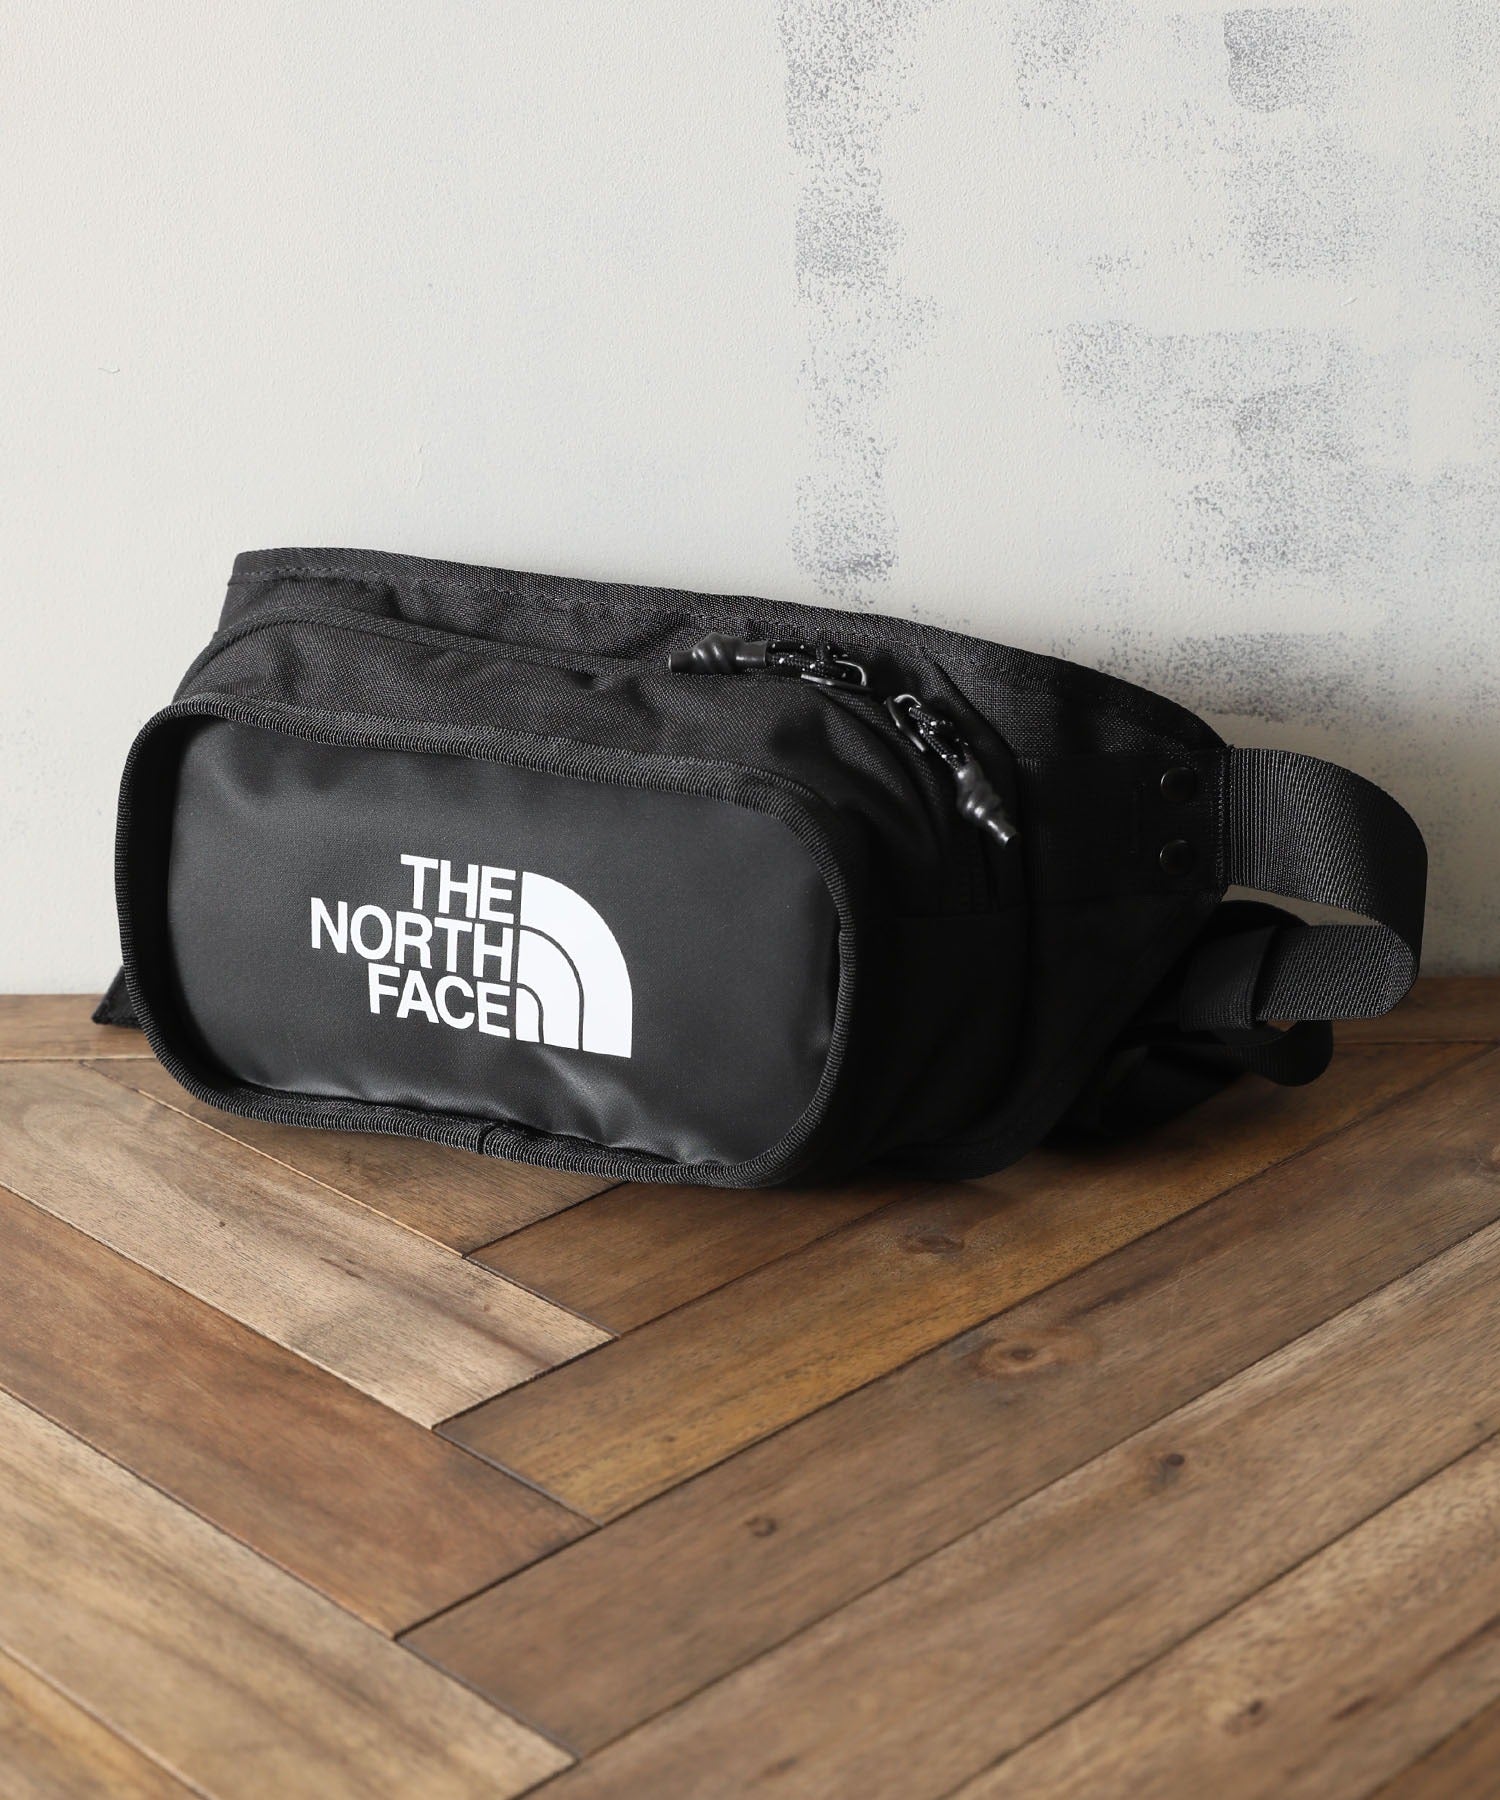 THE NORTH FACE/ザノースフェイス】Explore Hip Pack(エクスプロア